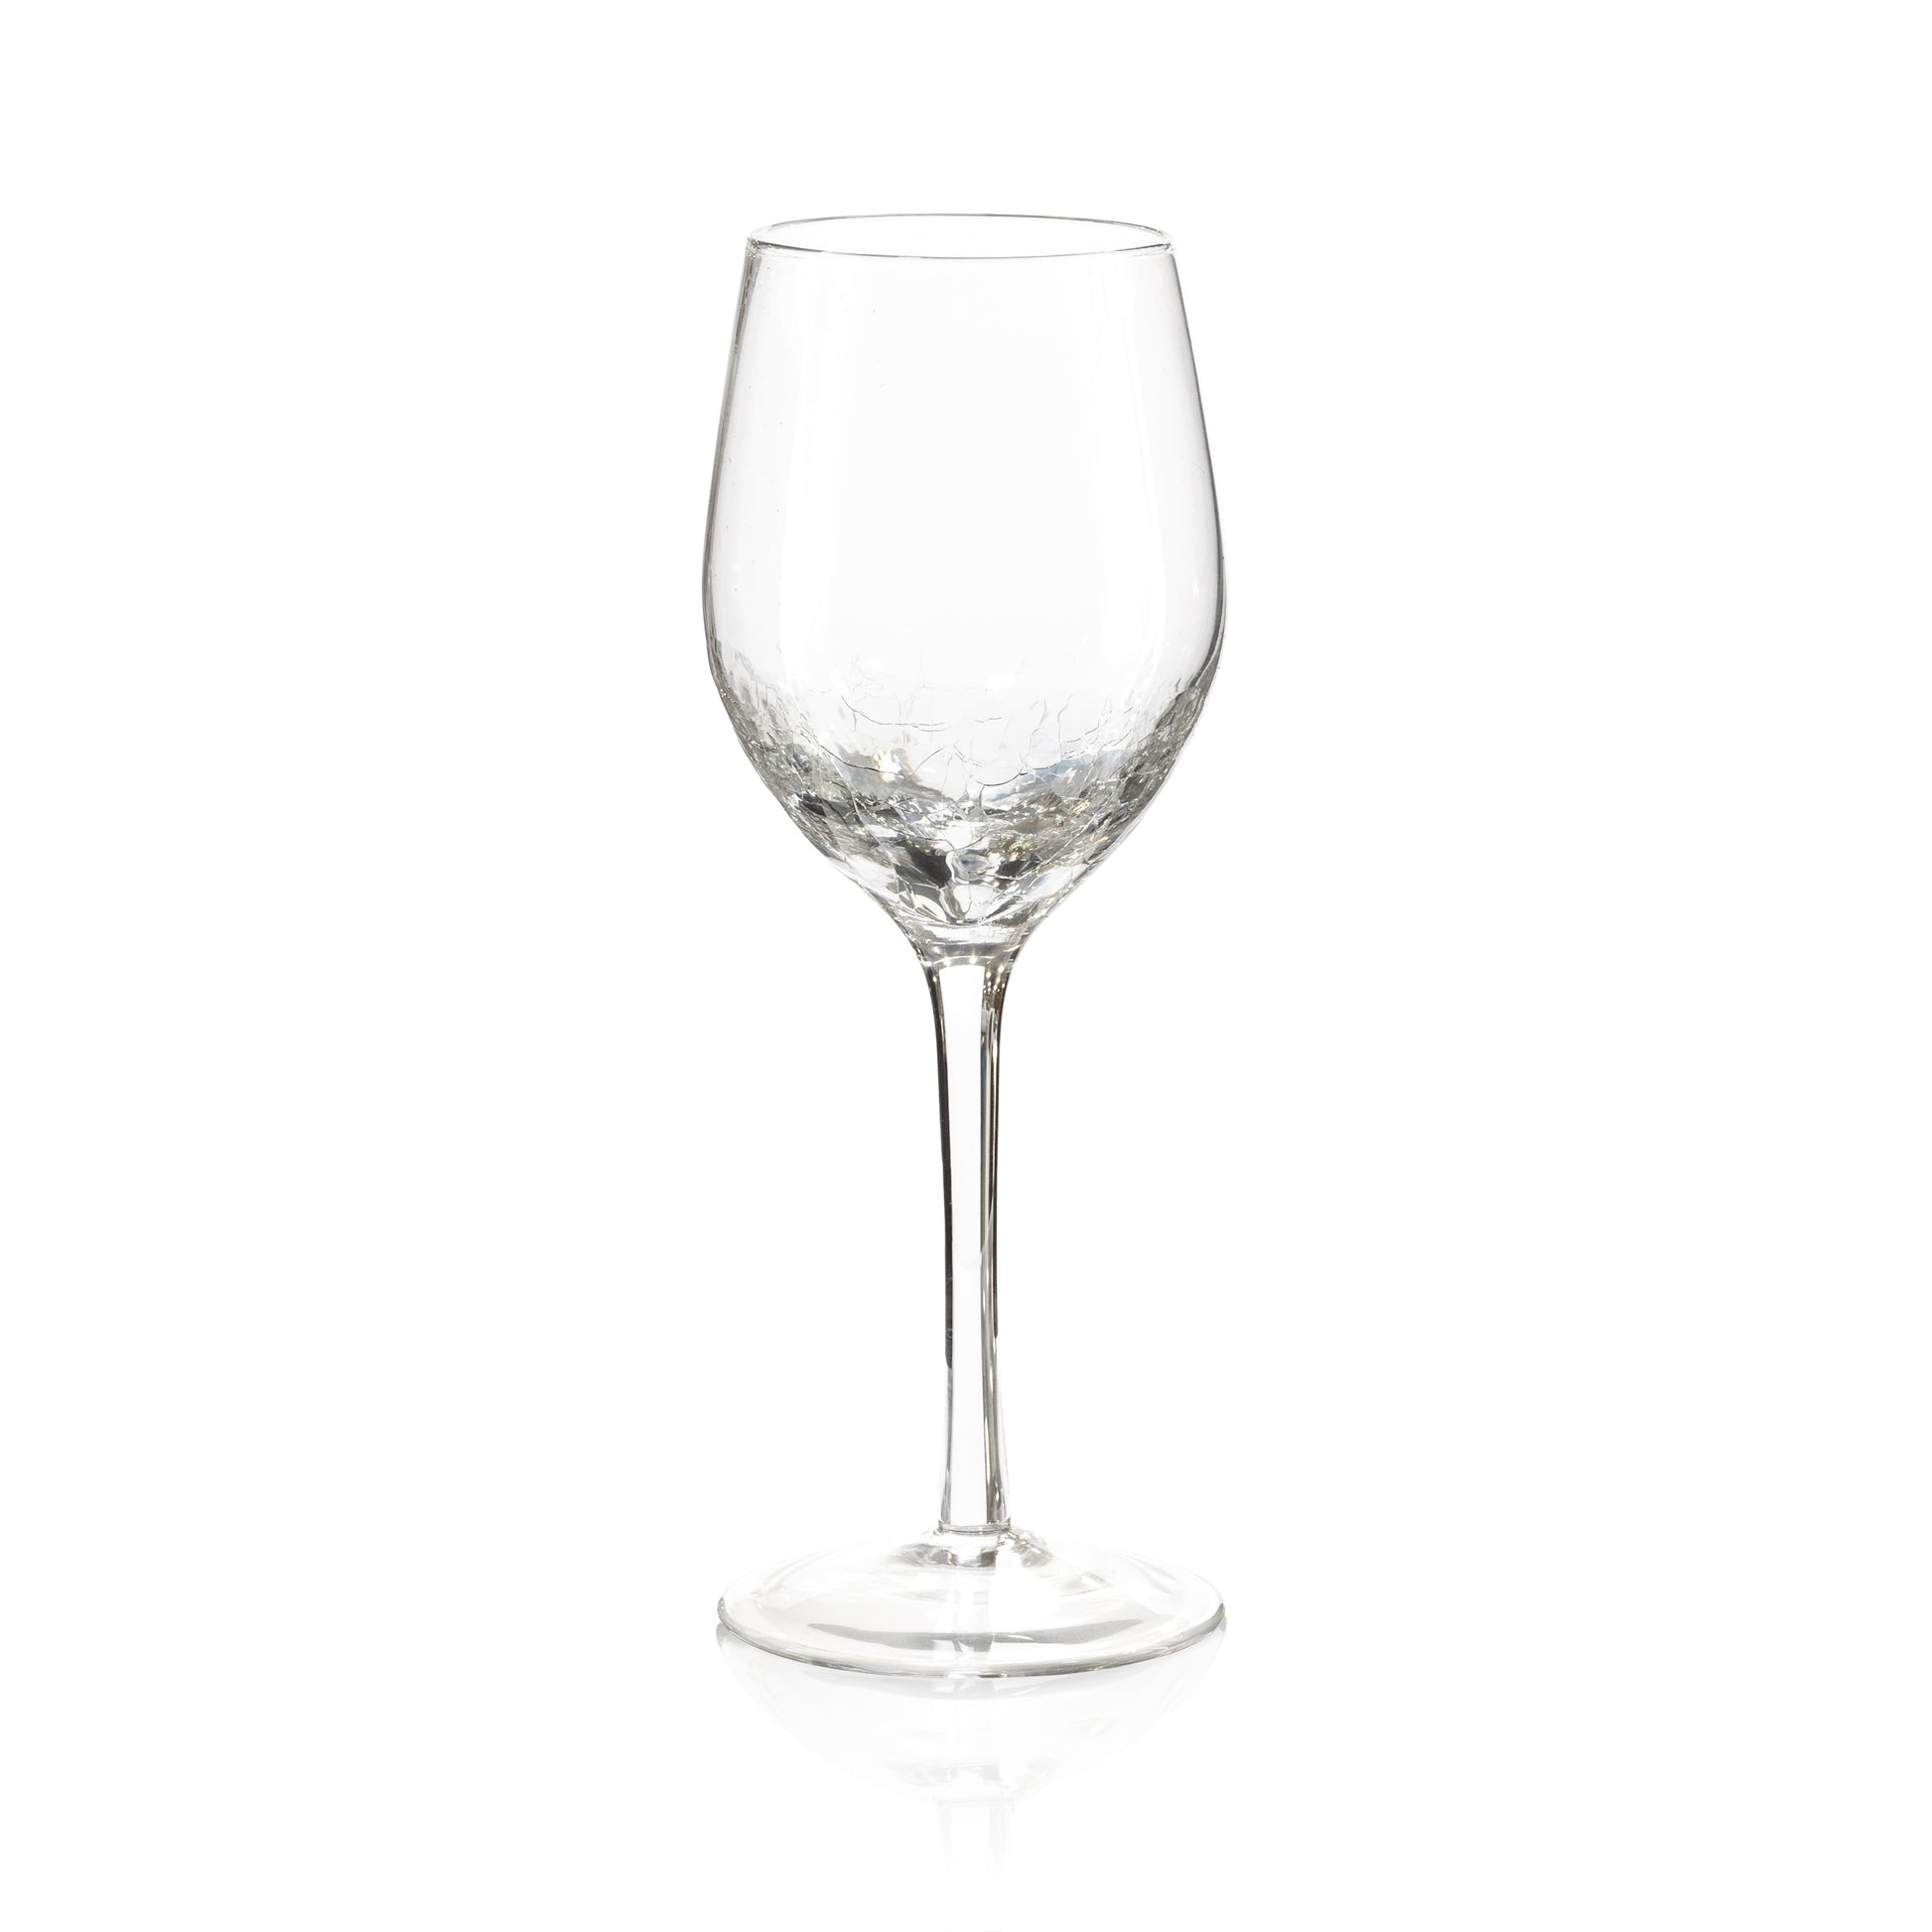 Crackle Clear White Wine Glass, Pier 1 Imports